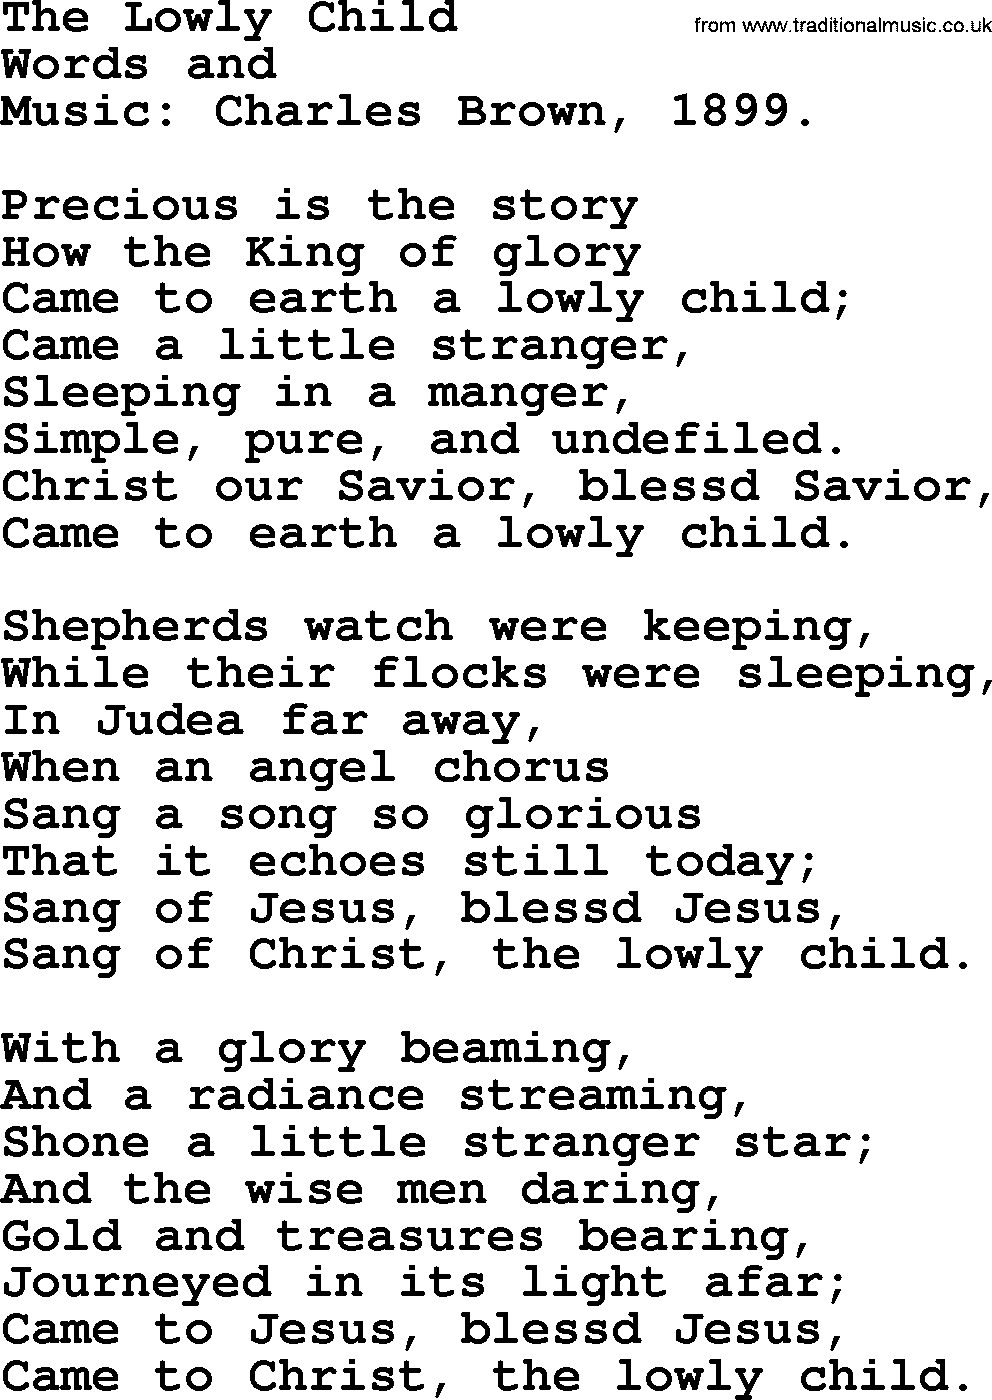 Christmas Hymns, Carols and Songs, title: The Lowly Child, lyrics with PDF